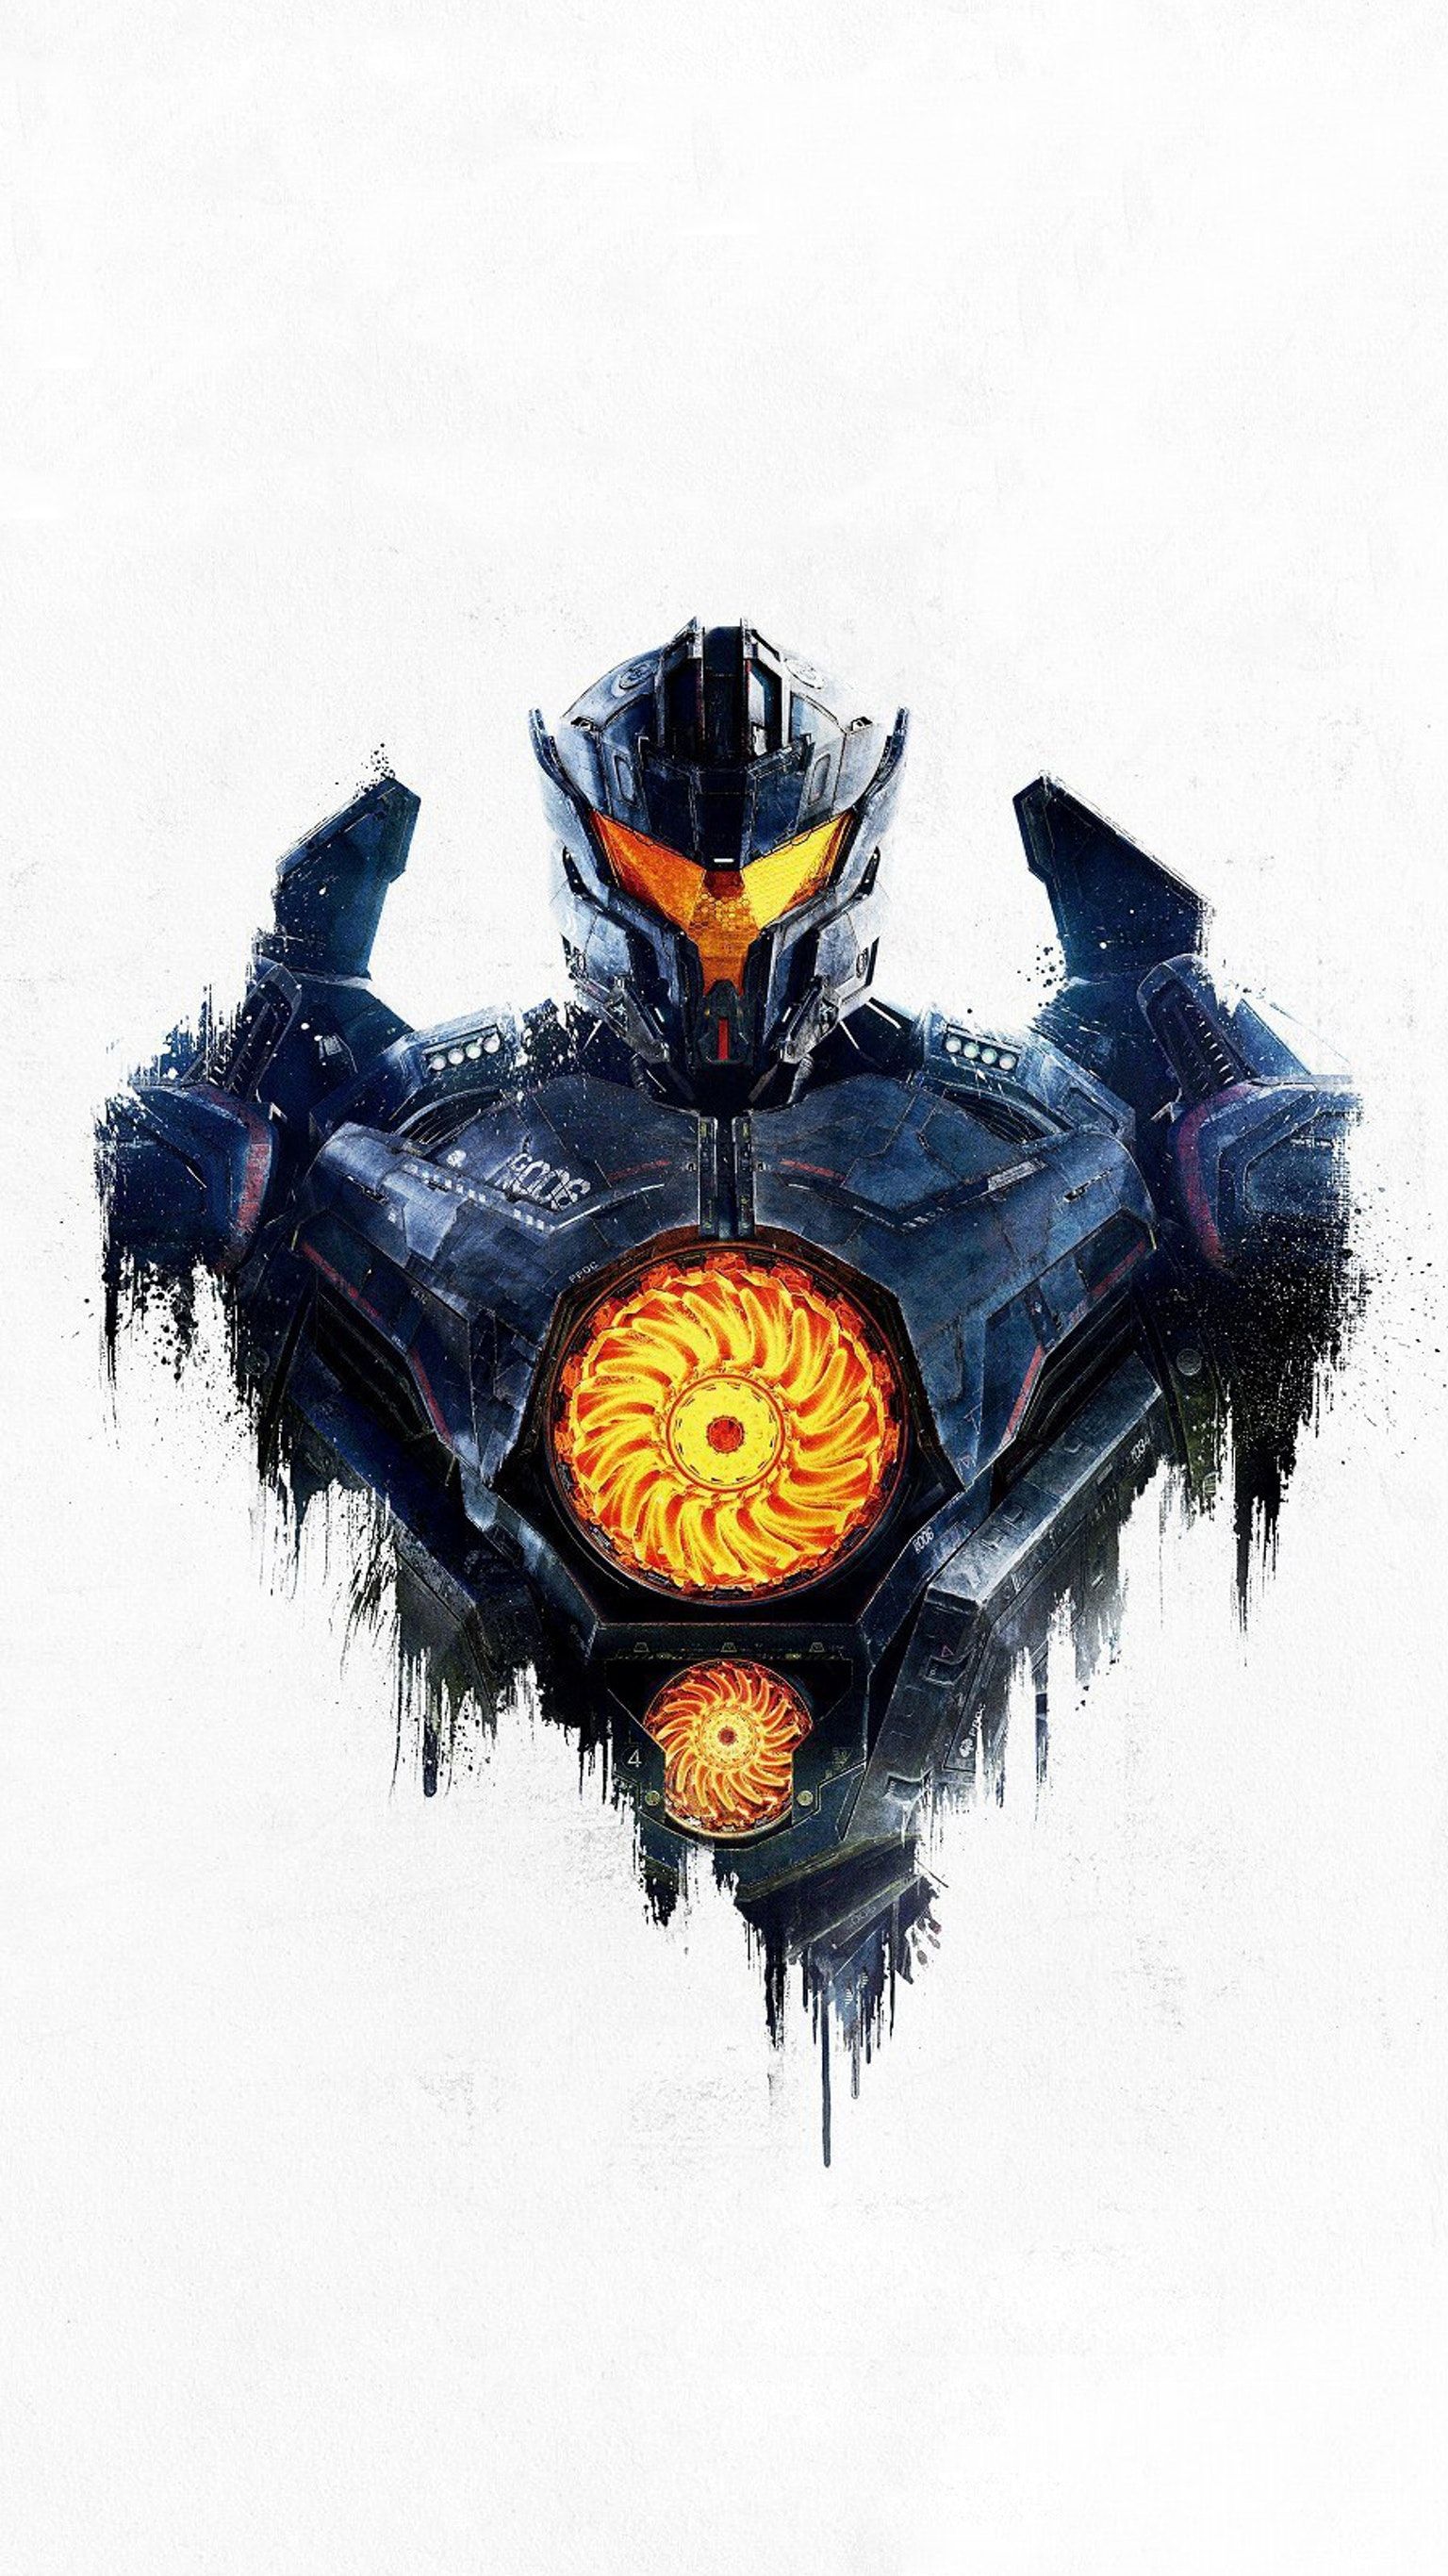 Pacific Rim Wallpaper For Android - HD Wallpaper 